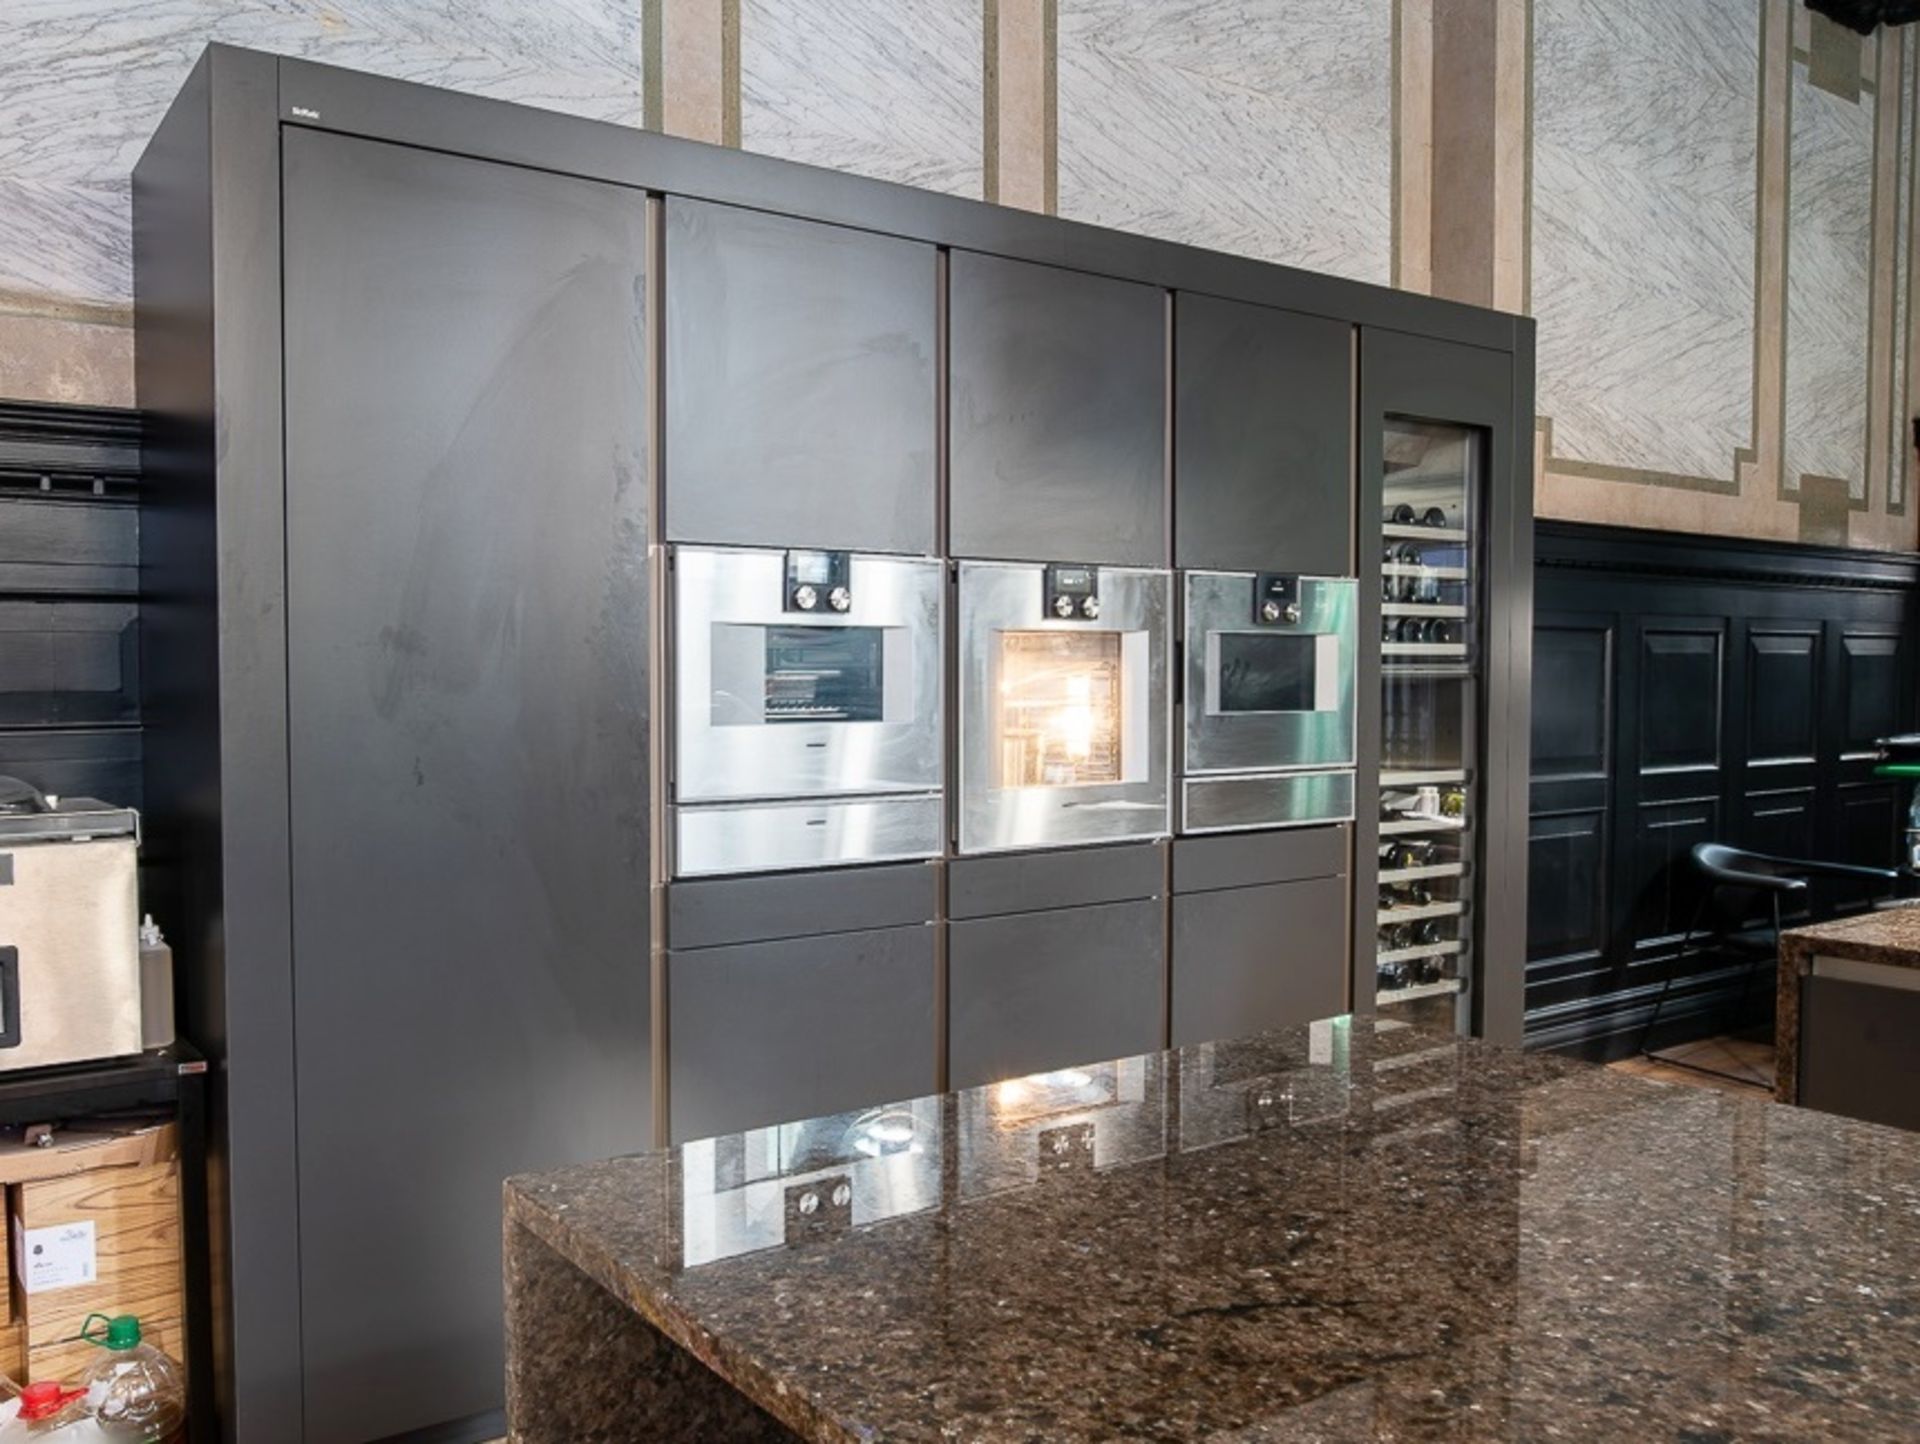 1 x SieMatic Fitted Kitchen in Basalt Grey Matt With Handleless Doors - Features Gaggenau - Image 10 of 10